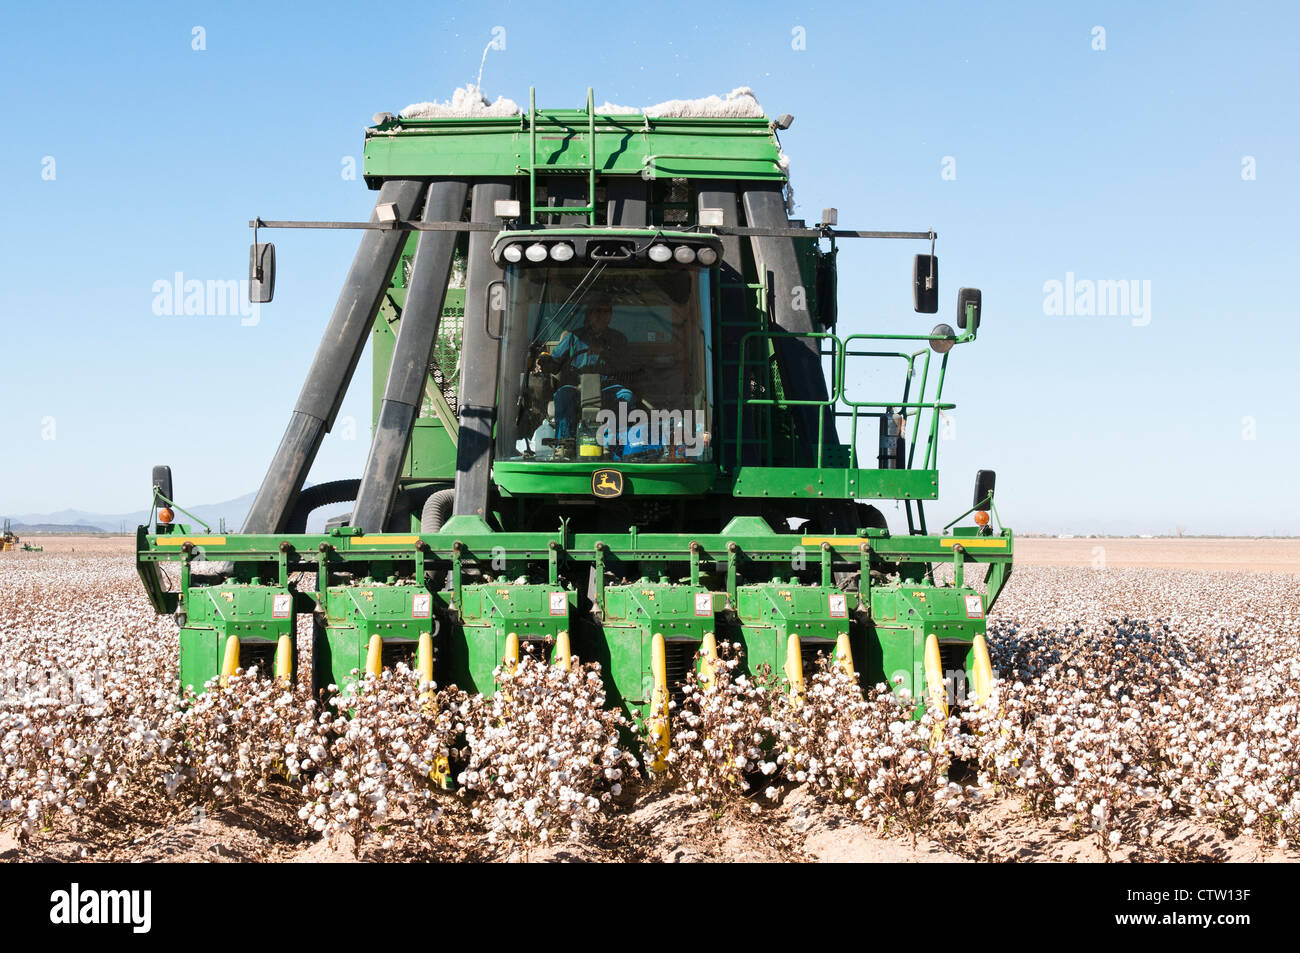 A pair of cotton picking machines harvest a cotton field in Arizona. Stock Photo